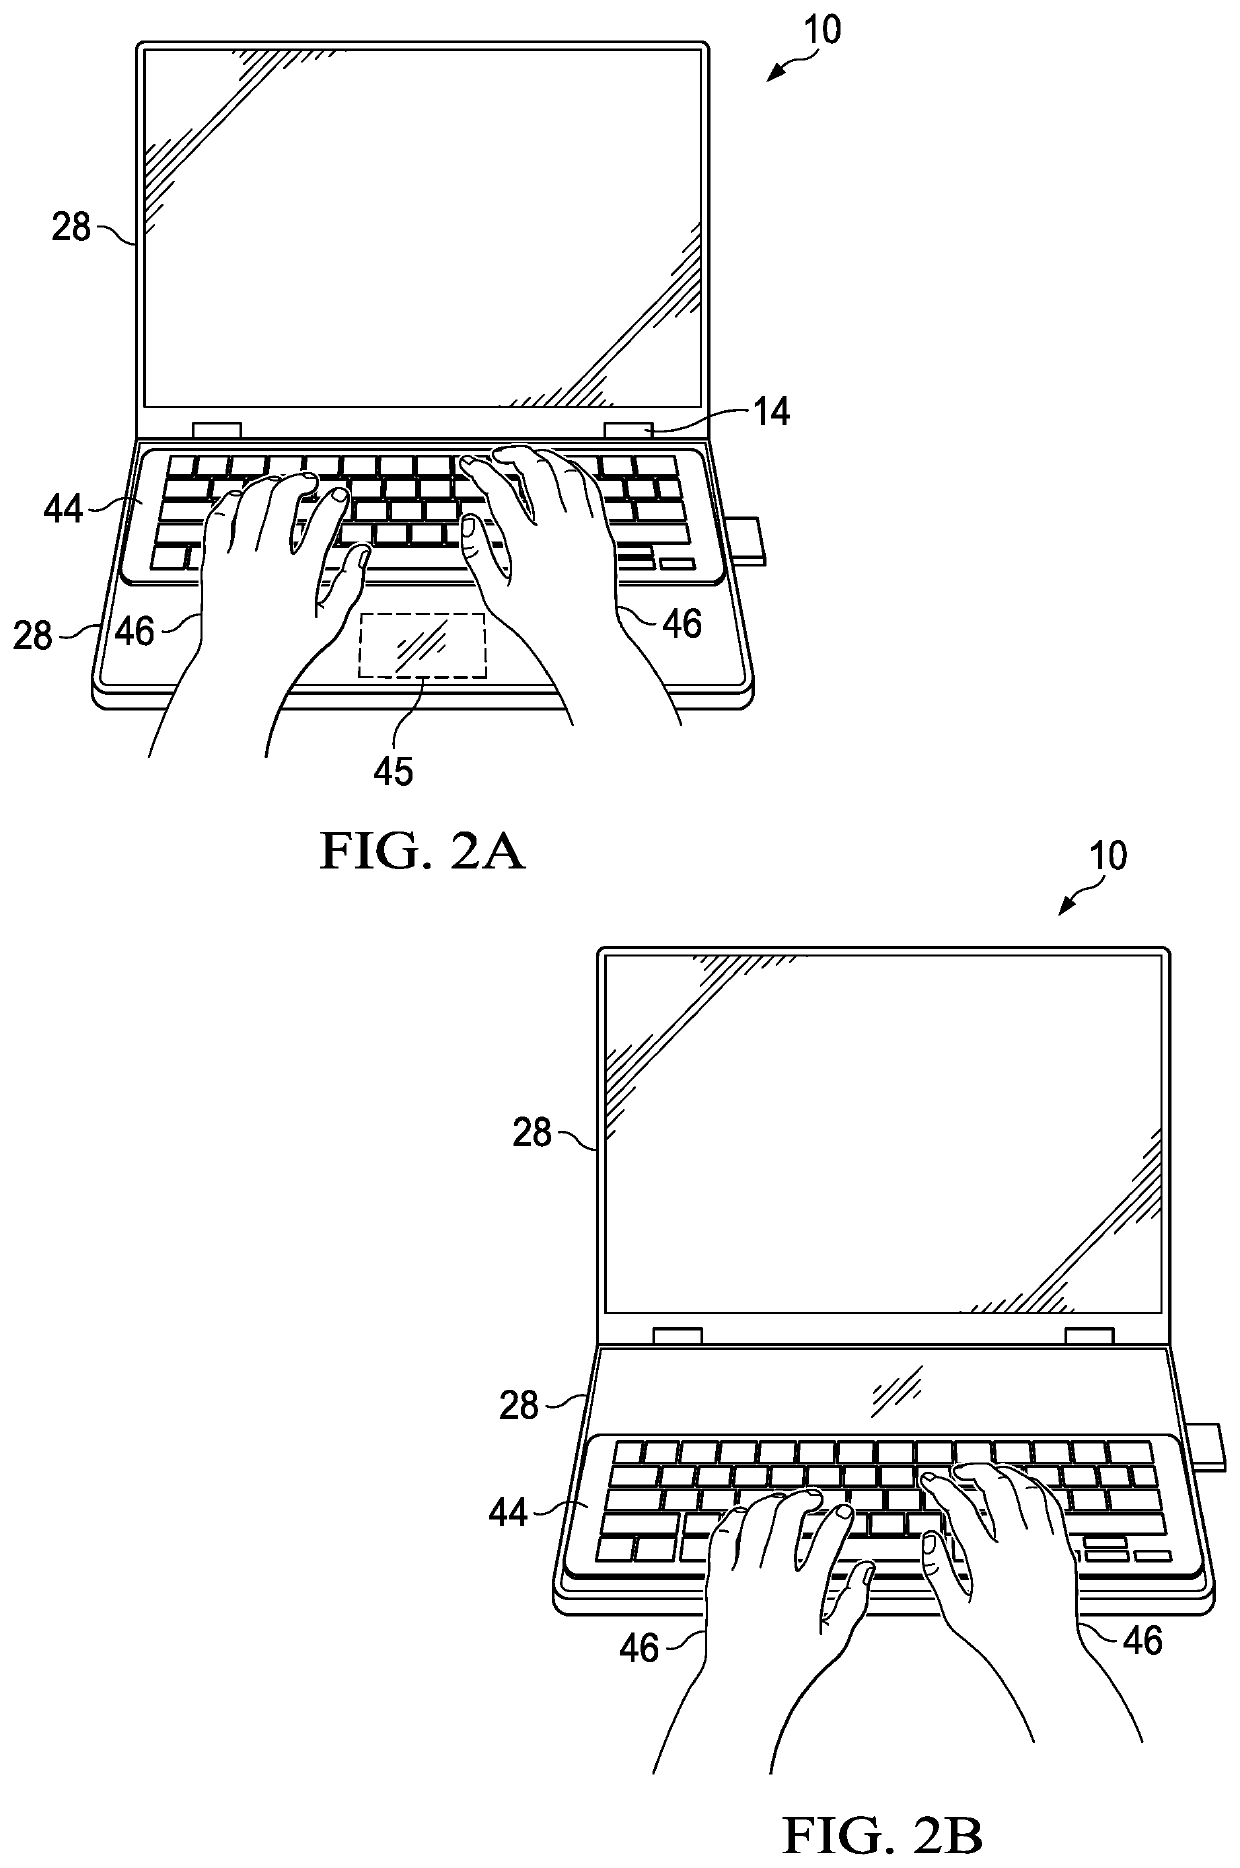 Dynamic keyboard support at support and display surfaces